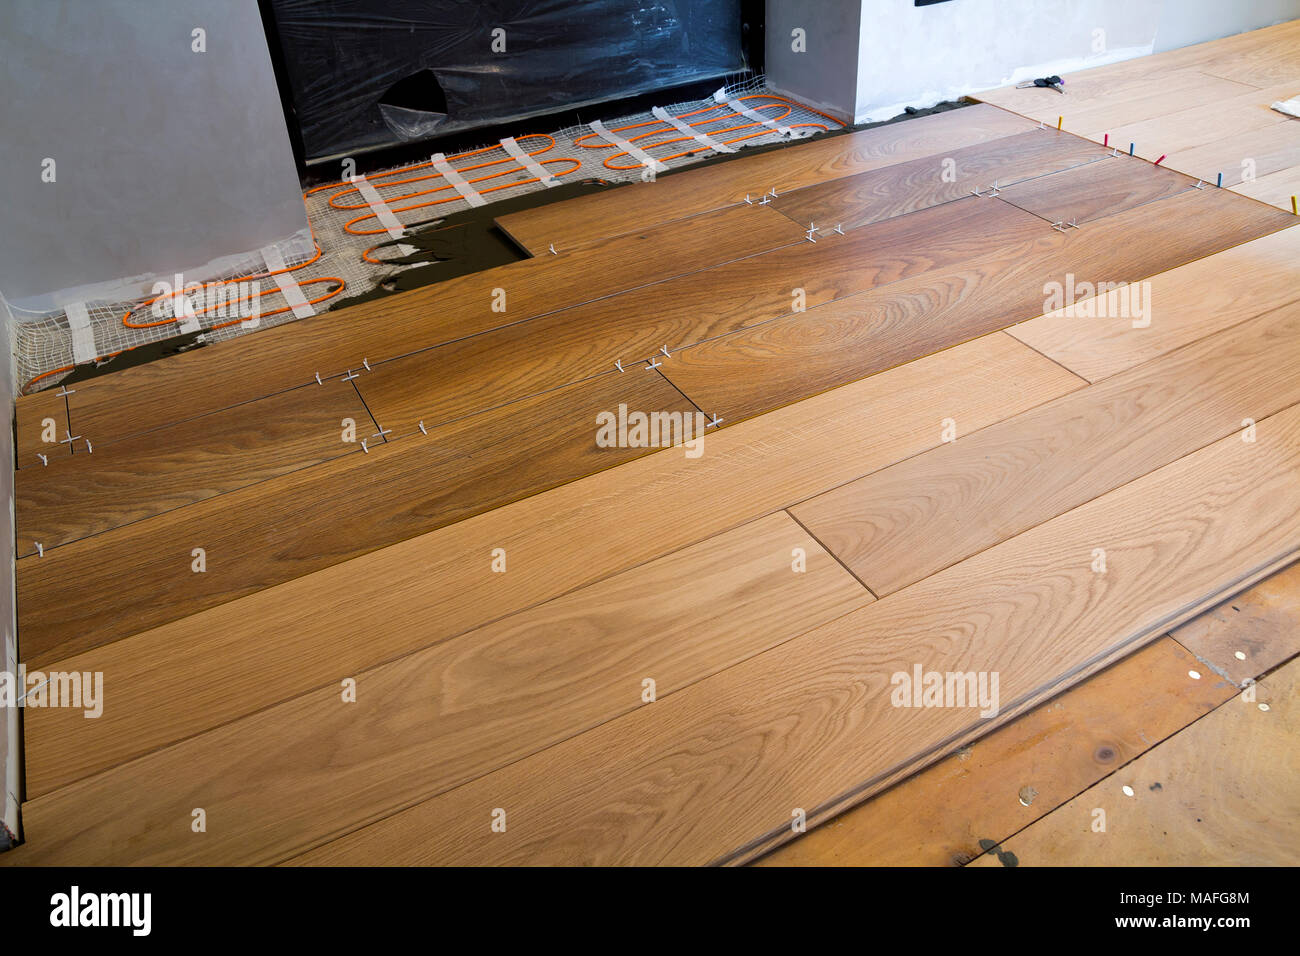 Variety of wooden like tiles. Samples of fake wood tiles for flooring.  Assortment of floor laminate / tiles in an interior shop Stock Photo - Alamy